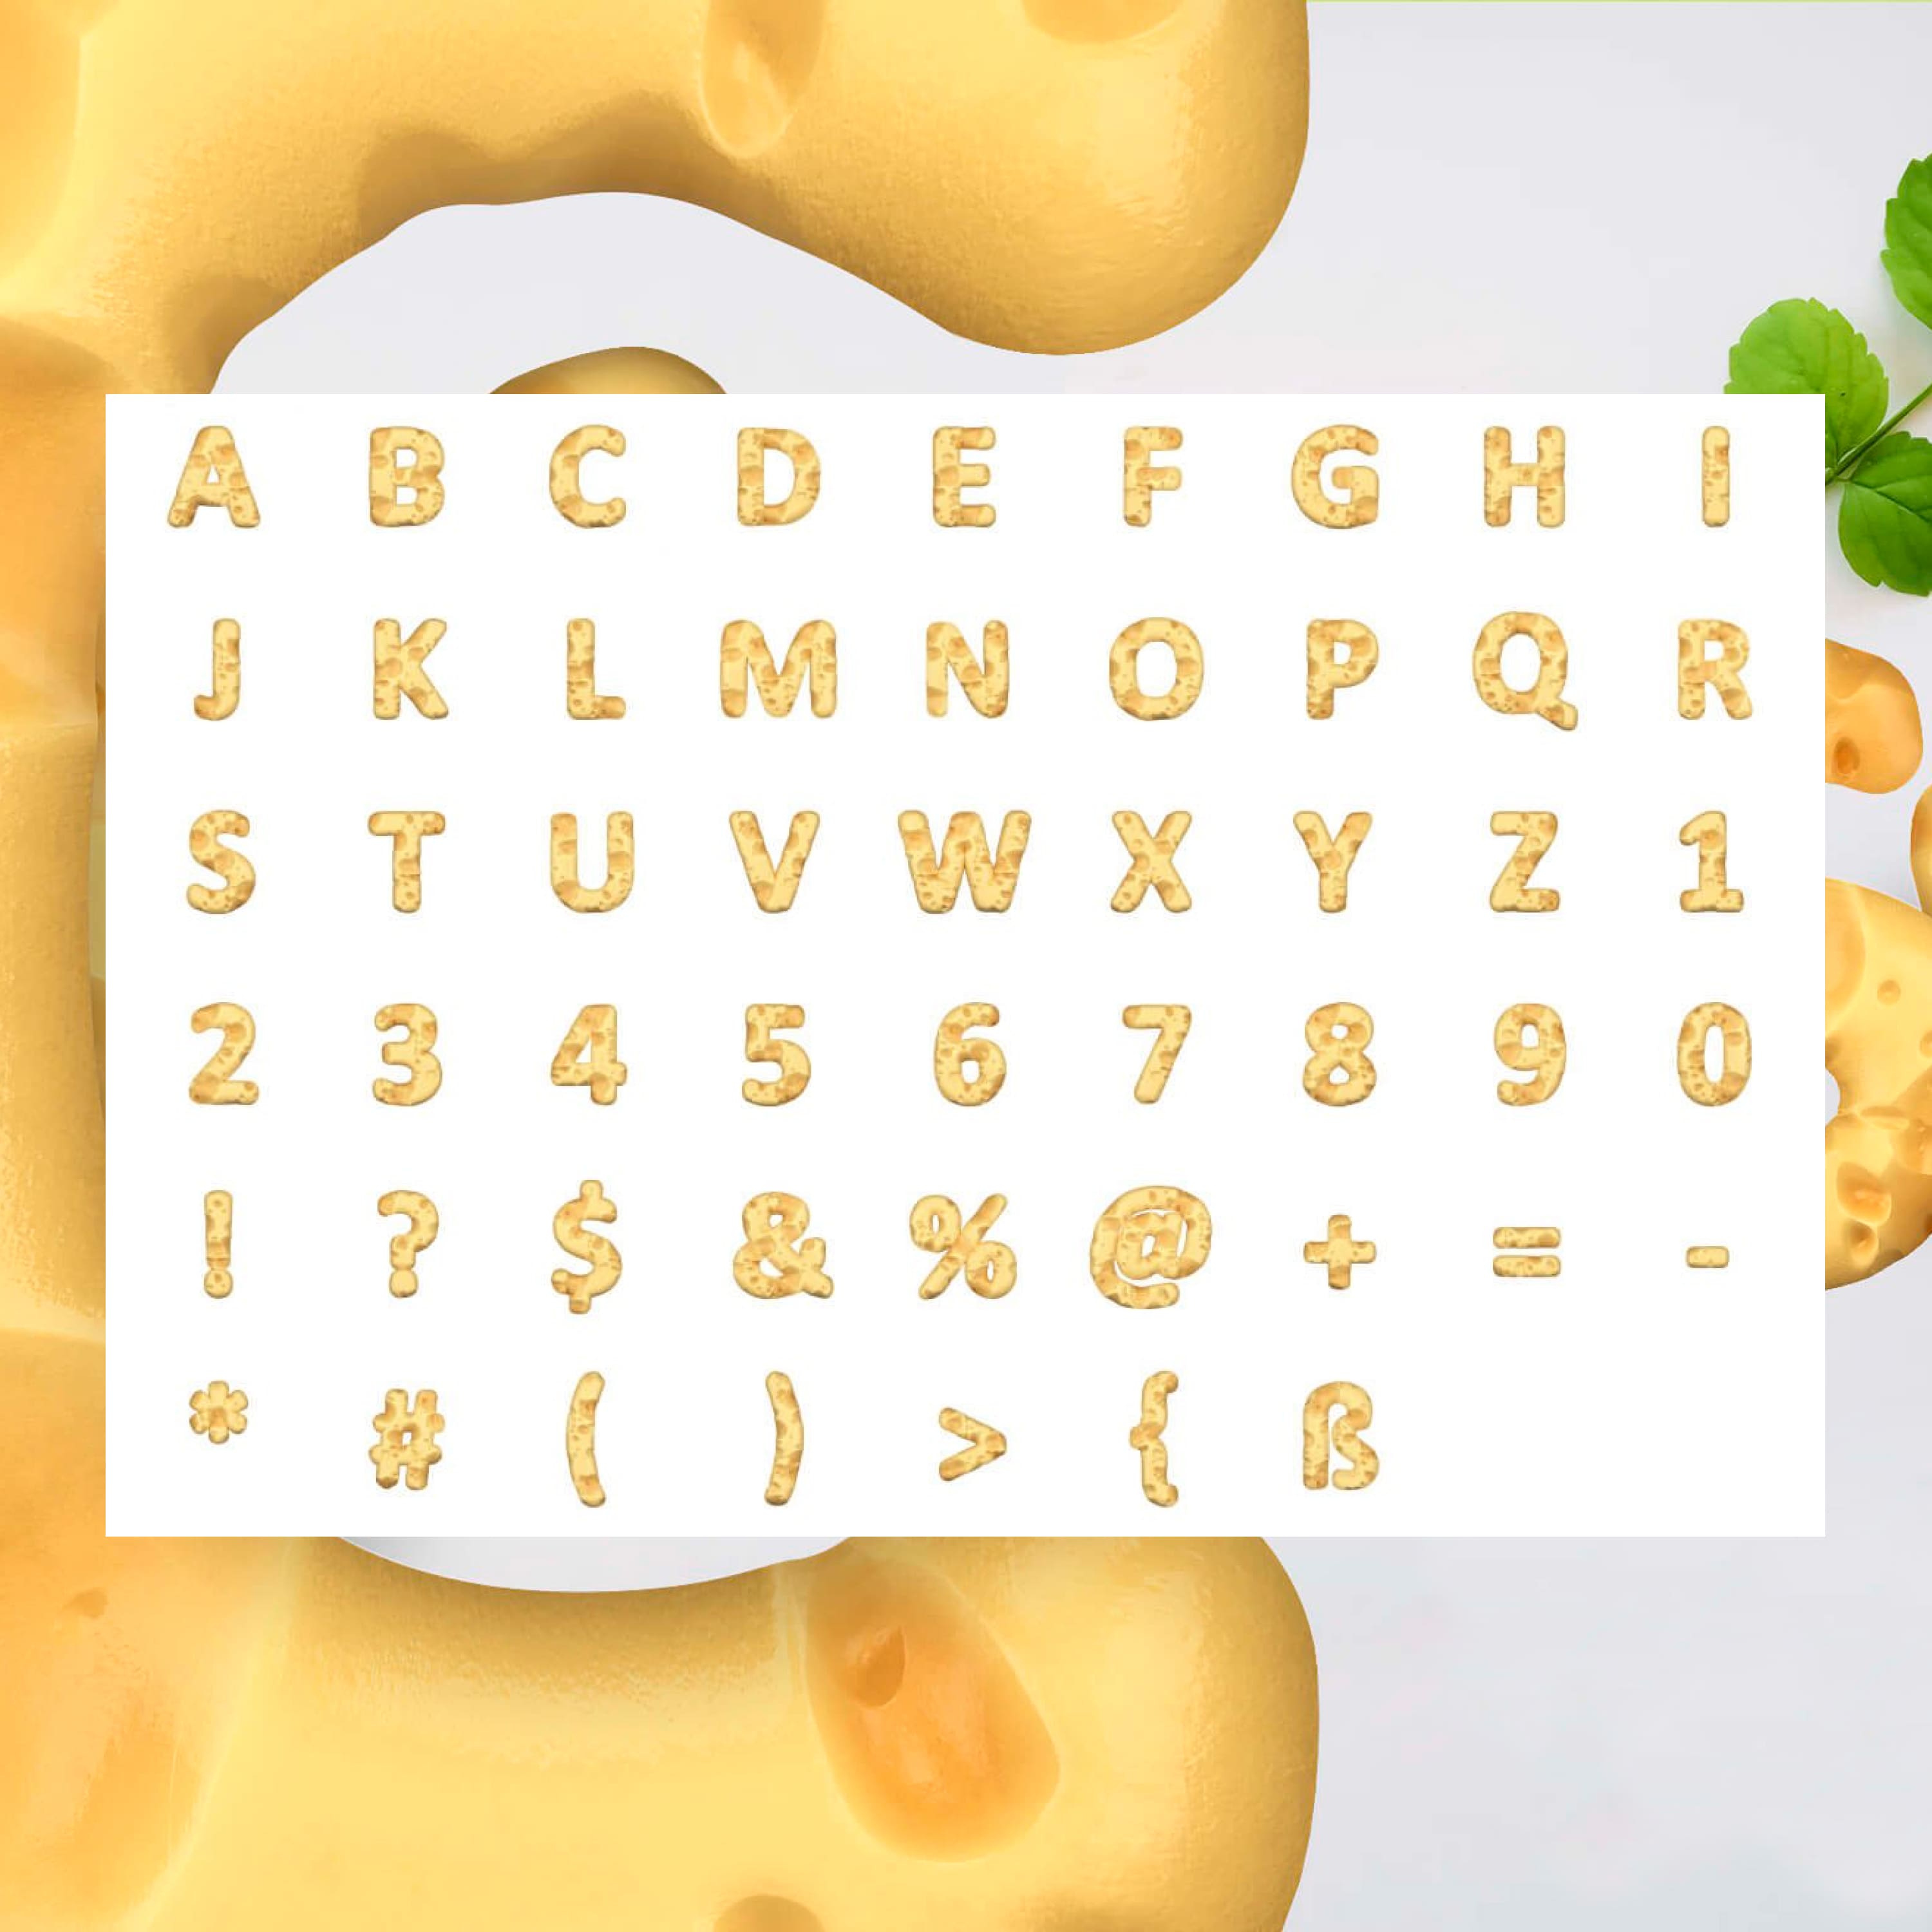 Colorful 3D Swiss Cheese Style Alphabet.